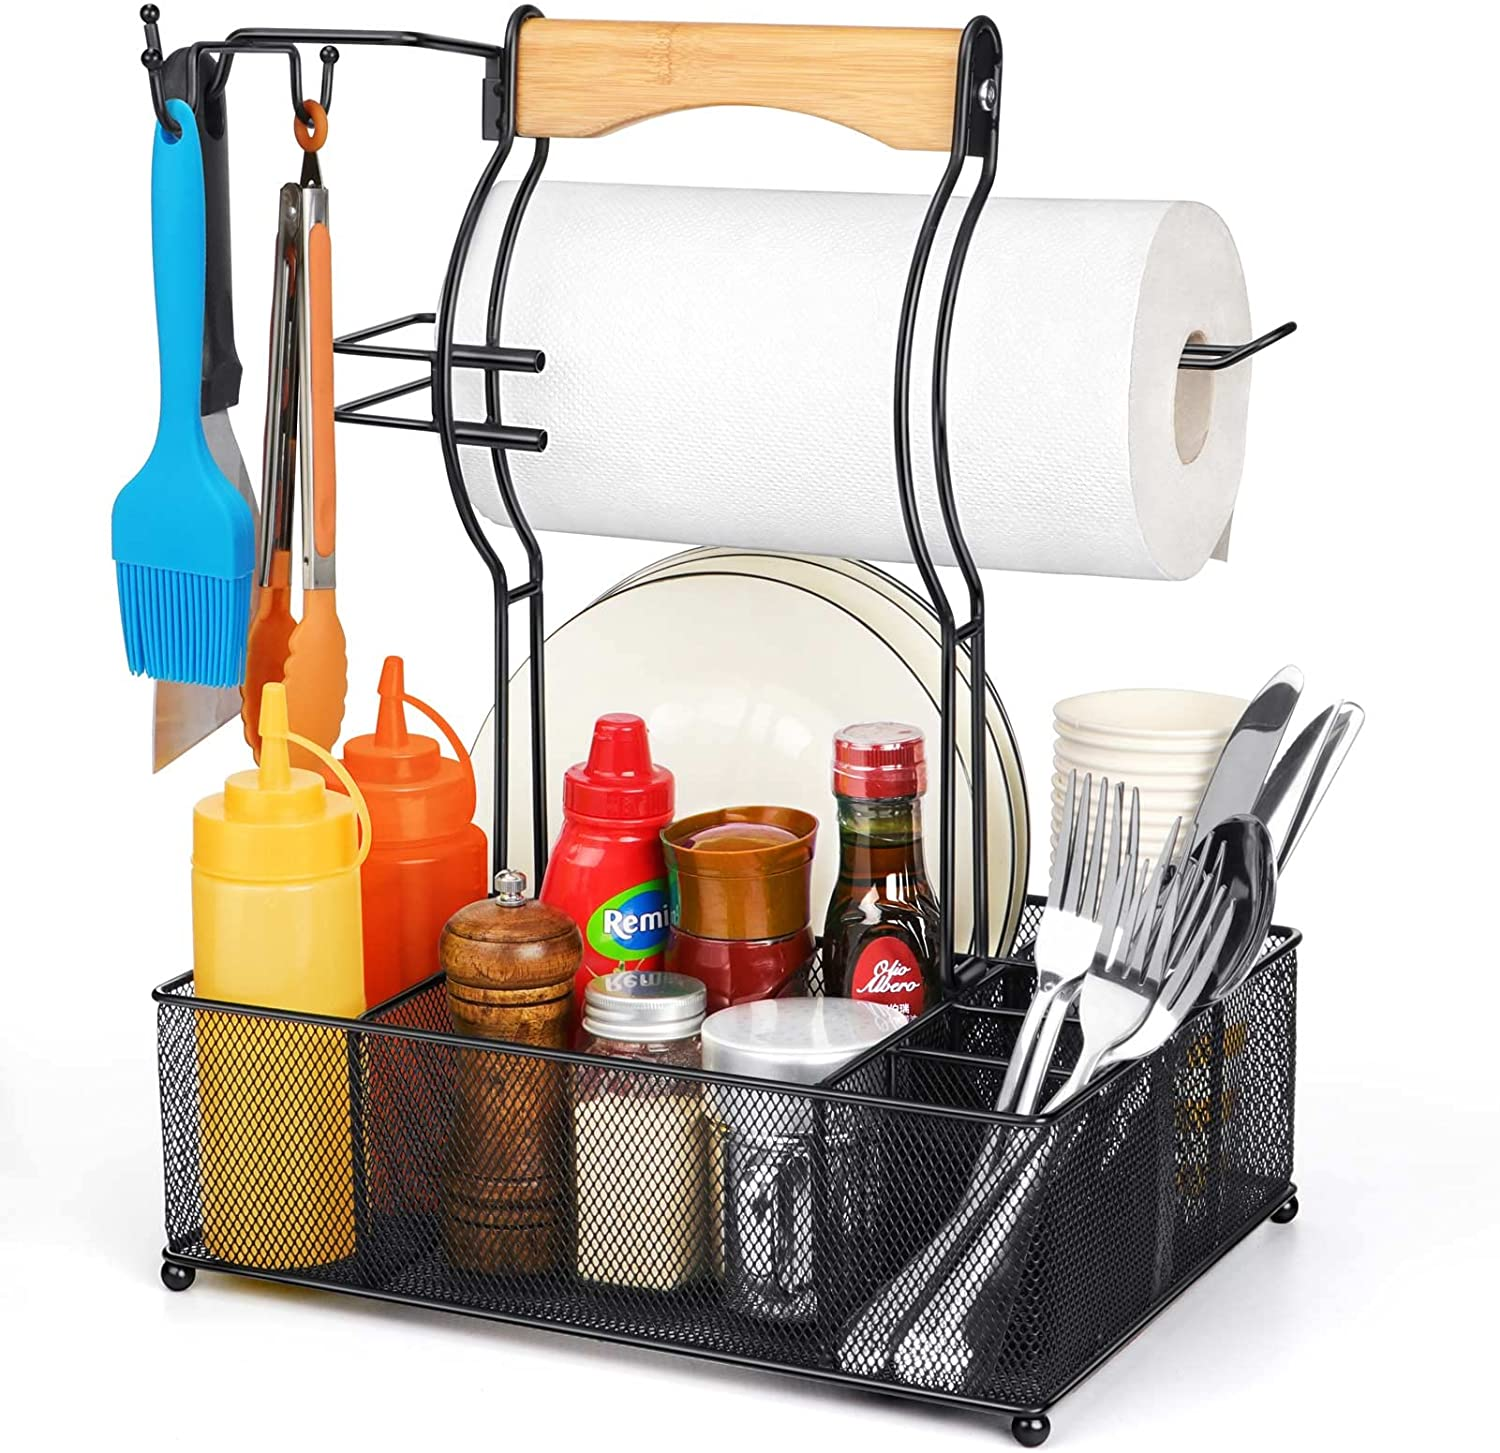 Rustic Kitchen Multi-Use Caddy & Paper Towel Holder